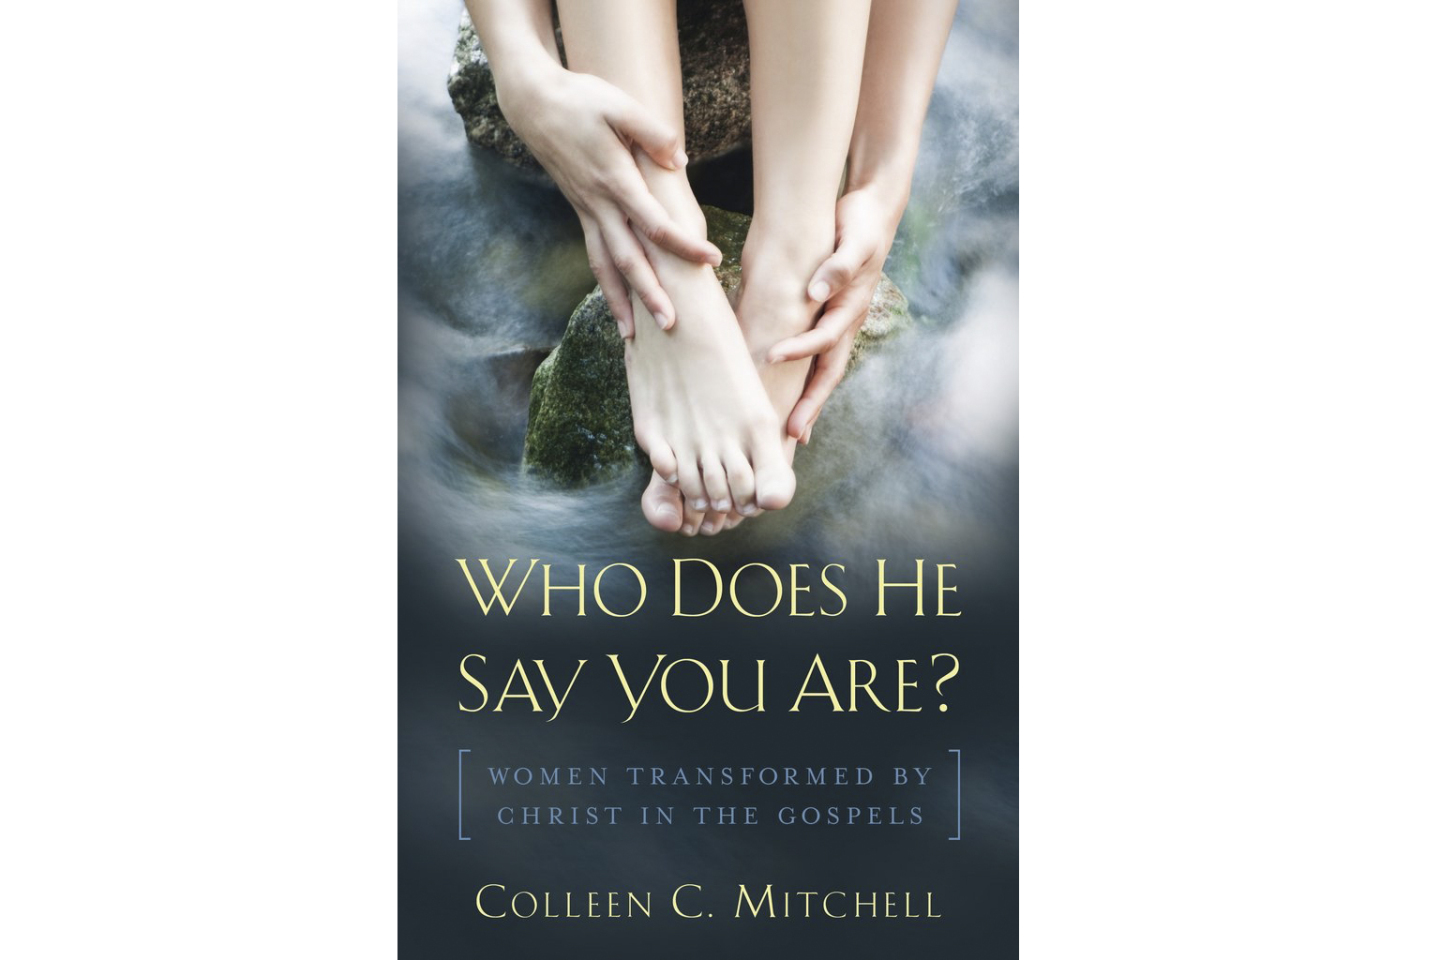 web-who-does-he-say-you-are-mitchell-servant-books